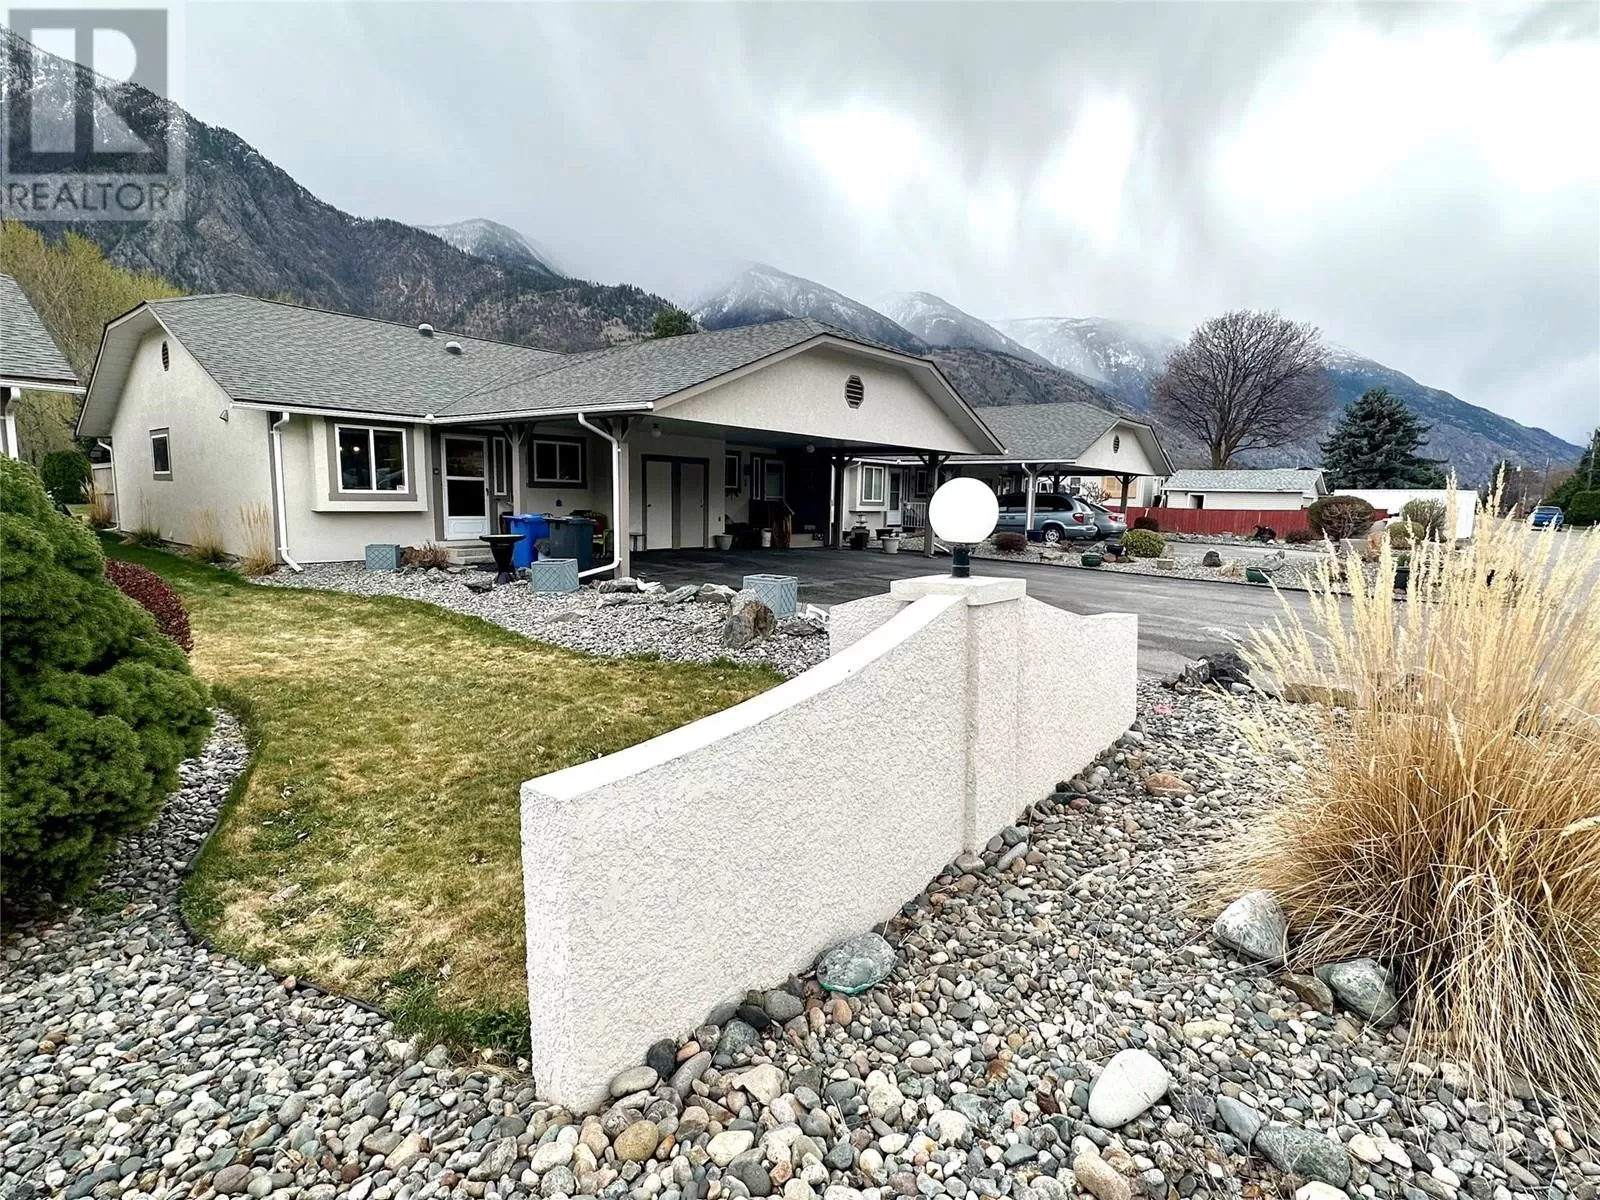 Row / Townhouse for rent: 815 11th Avenue Unit# 4, Keremeos, British Columbia V0X 1N3